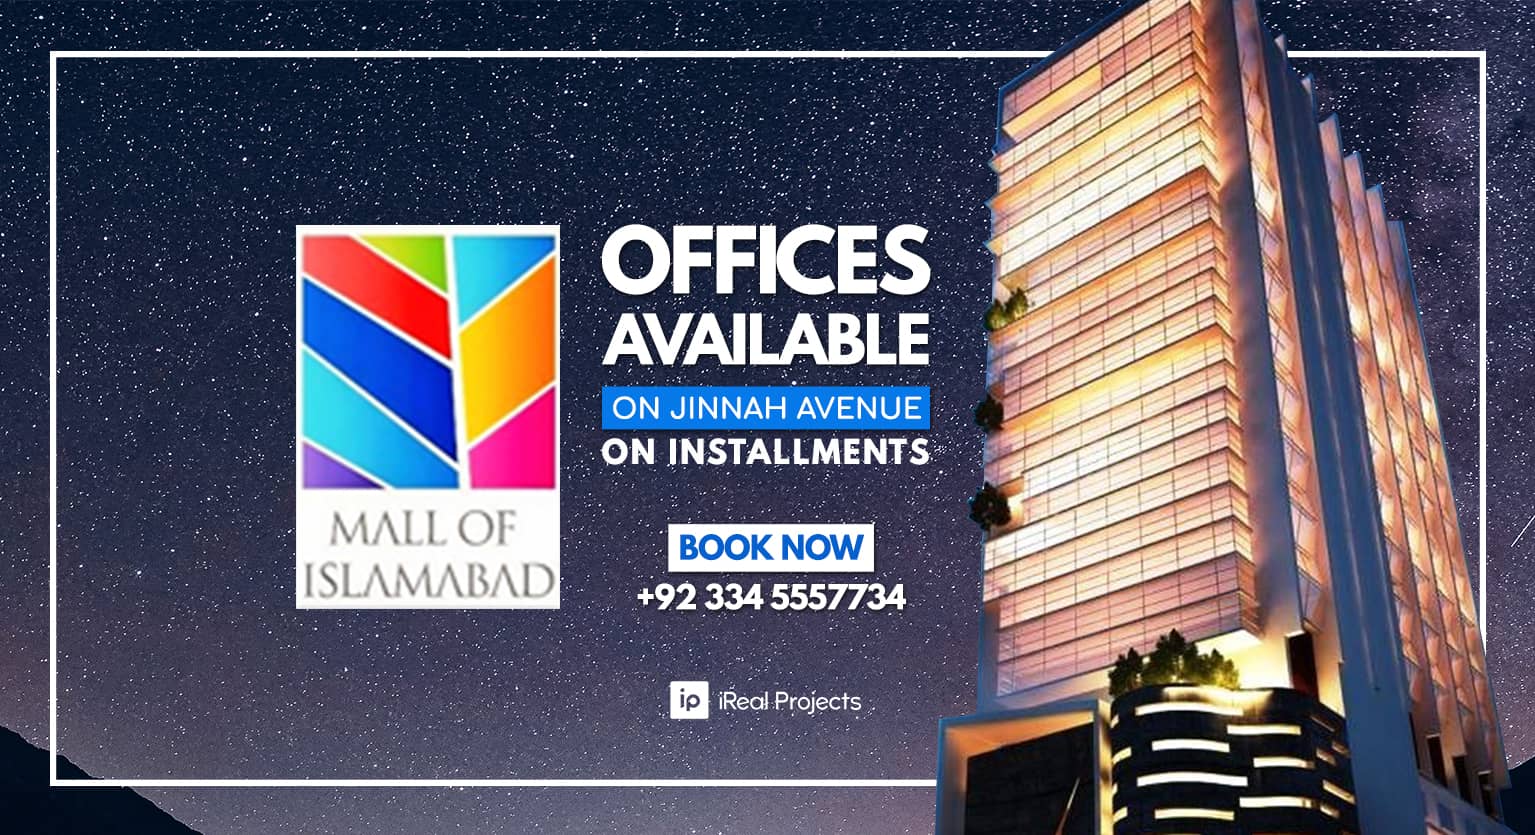 Offices on installments in Mall of Islamabad